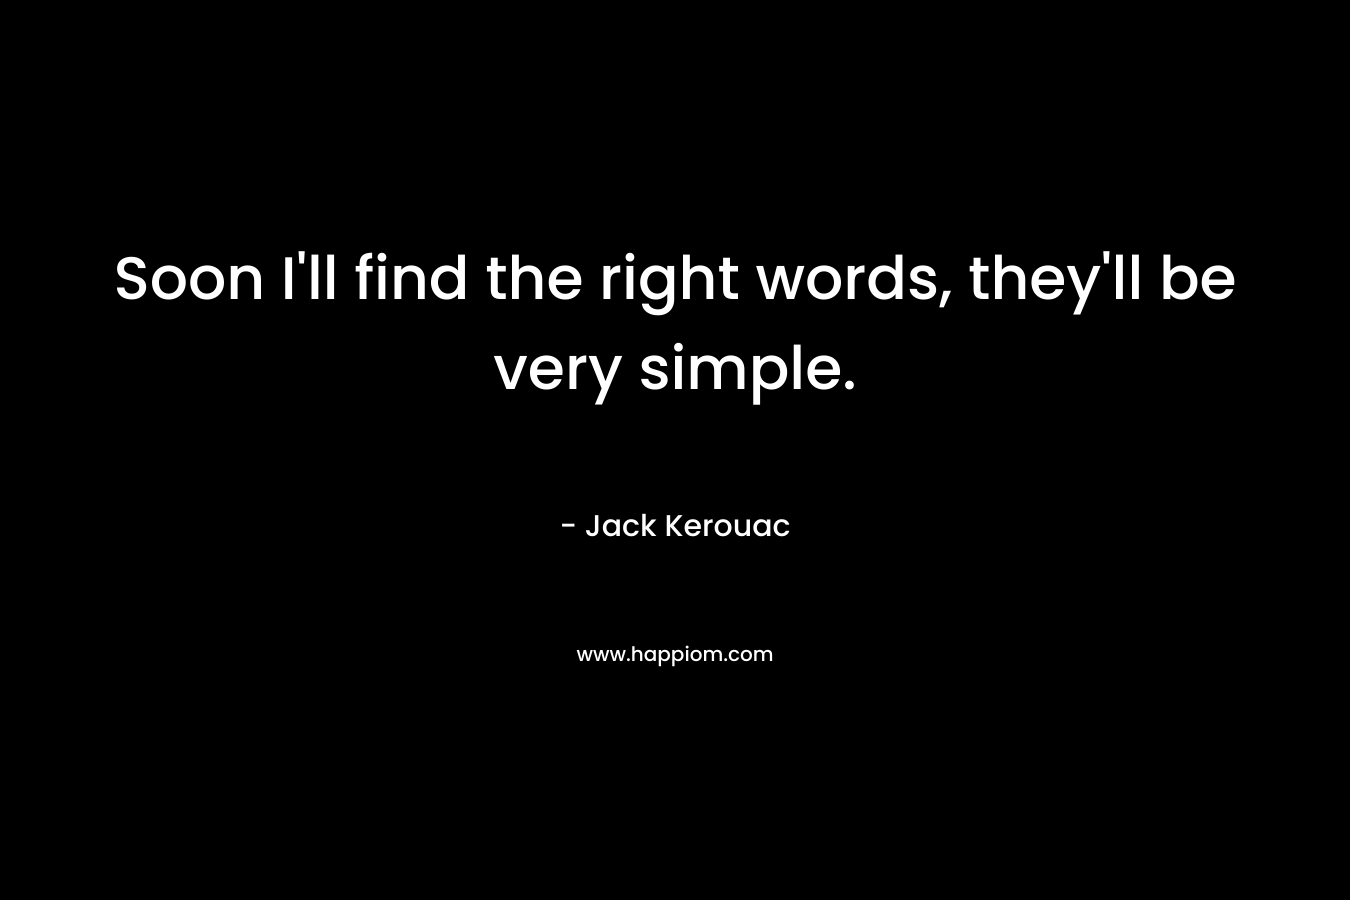 Soon I’ll find the right words, they’ll be very simple. – Jack Kerouac